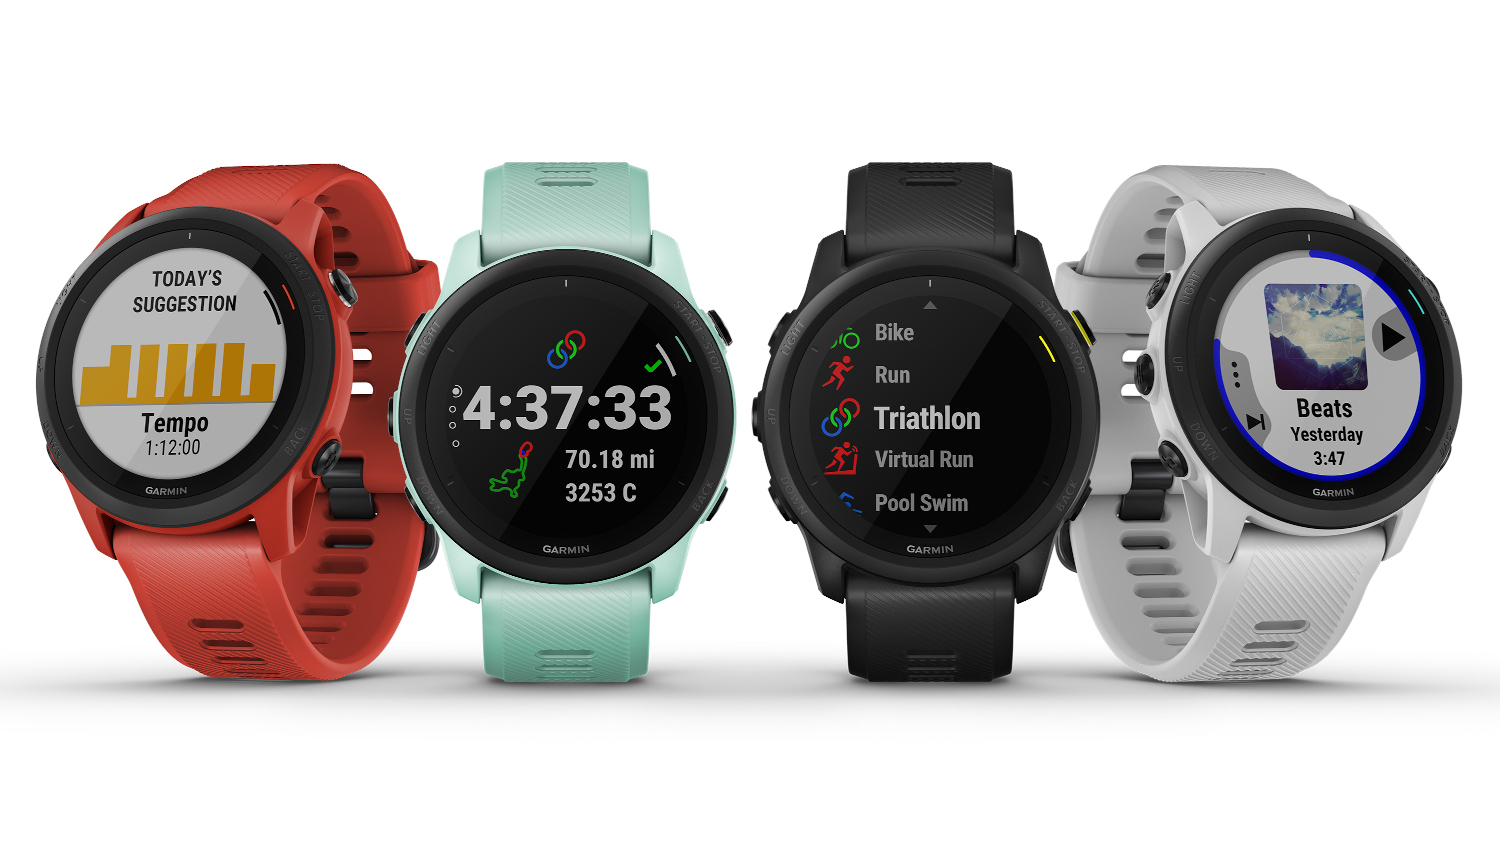 New Garmin Forerunner 745 Brings Improved Tracking and More | Digital Trends